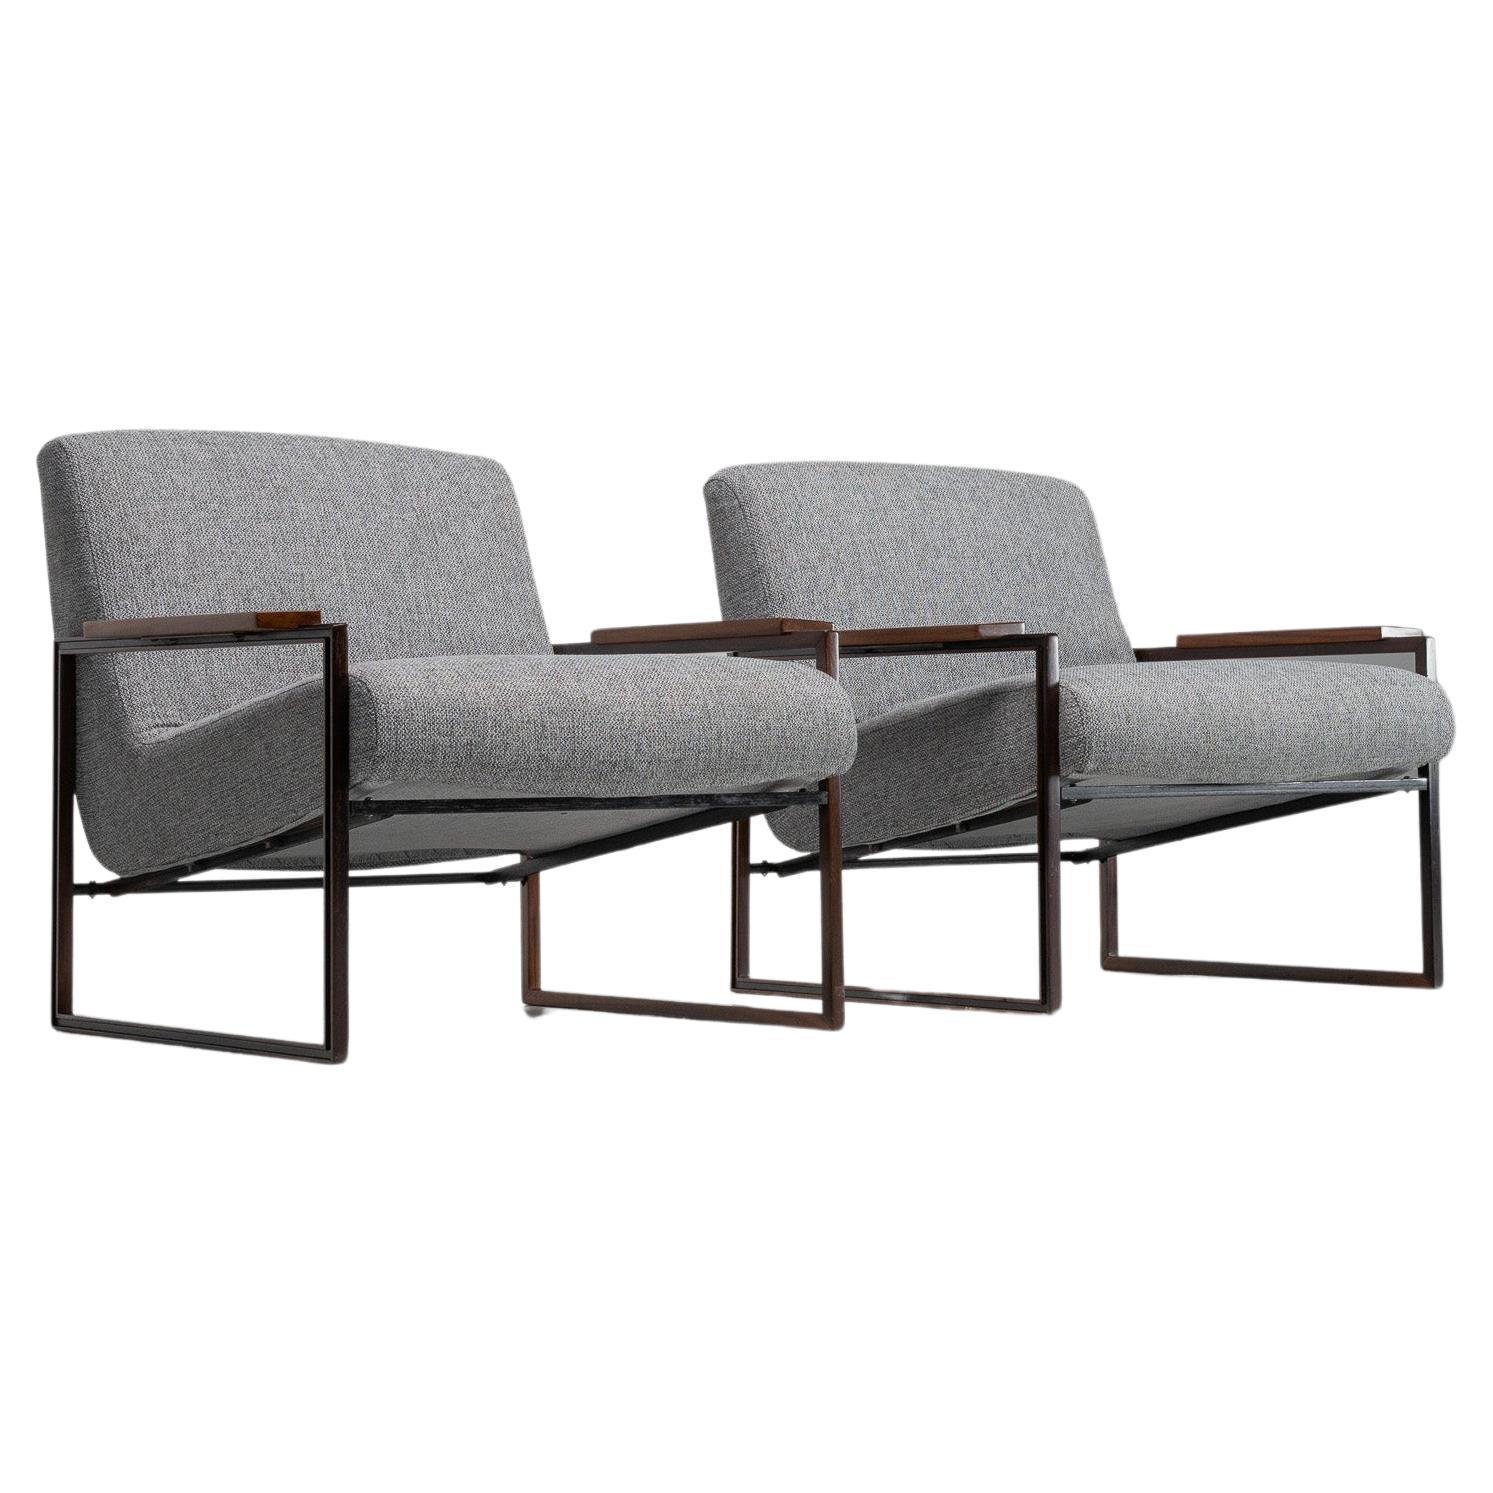 Percival Lafer Mp-5 lounge chairs pair Brazil 1961 For Sale